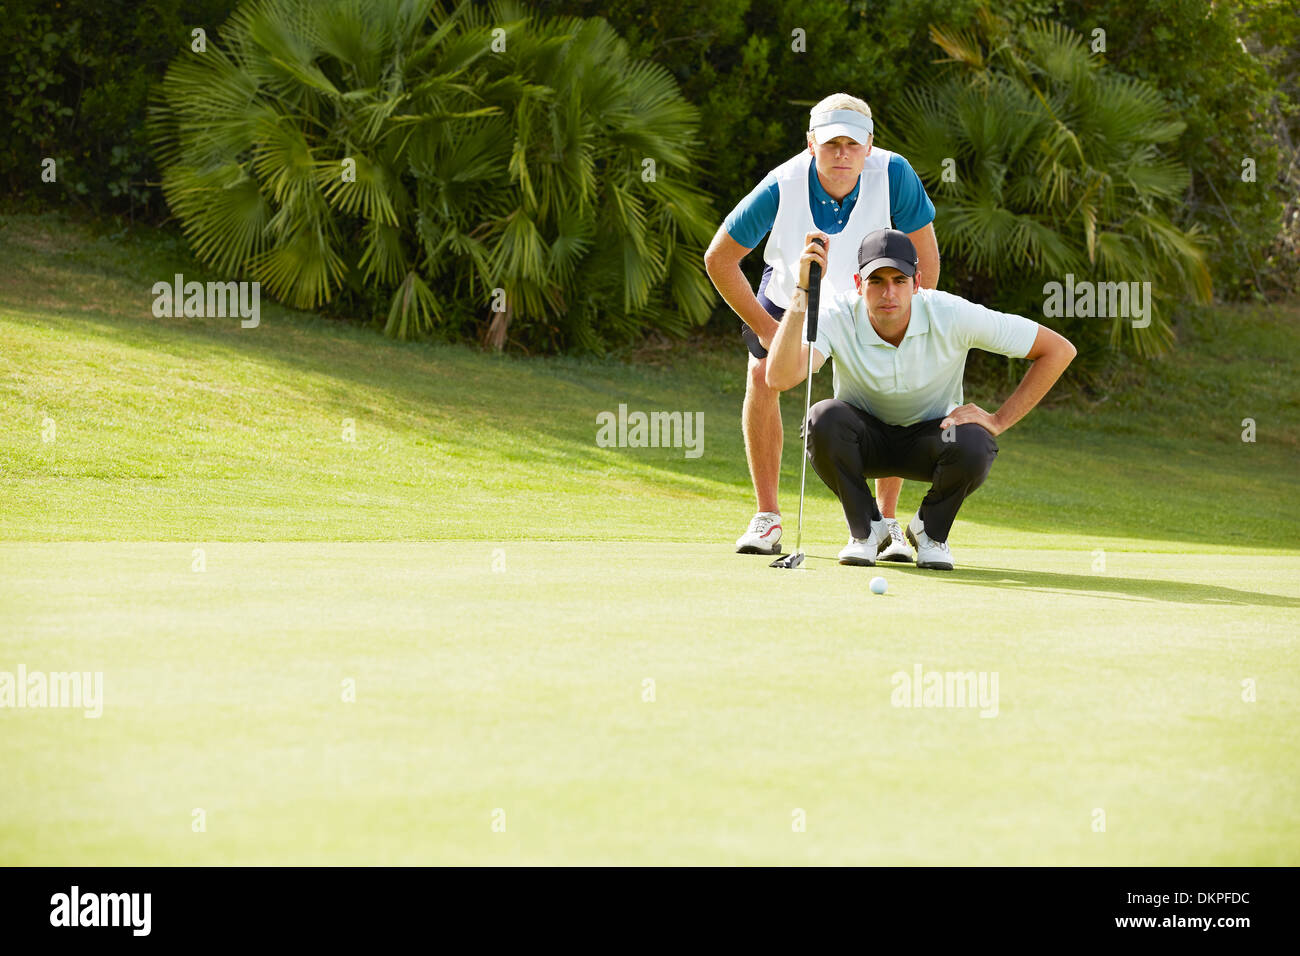 Caddy and golfer preparing to putt Stock Photo